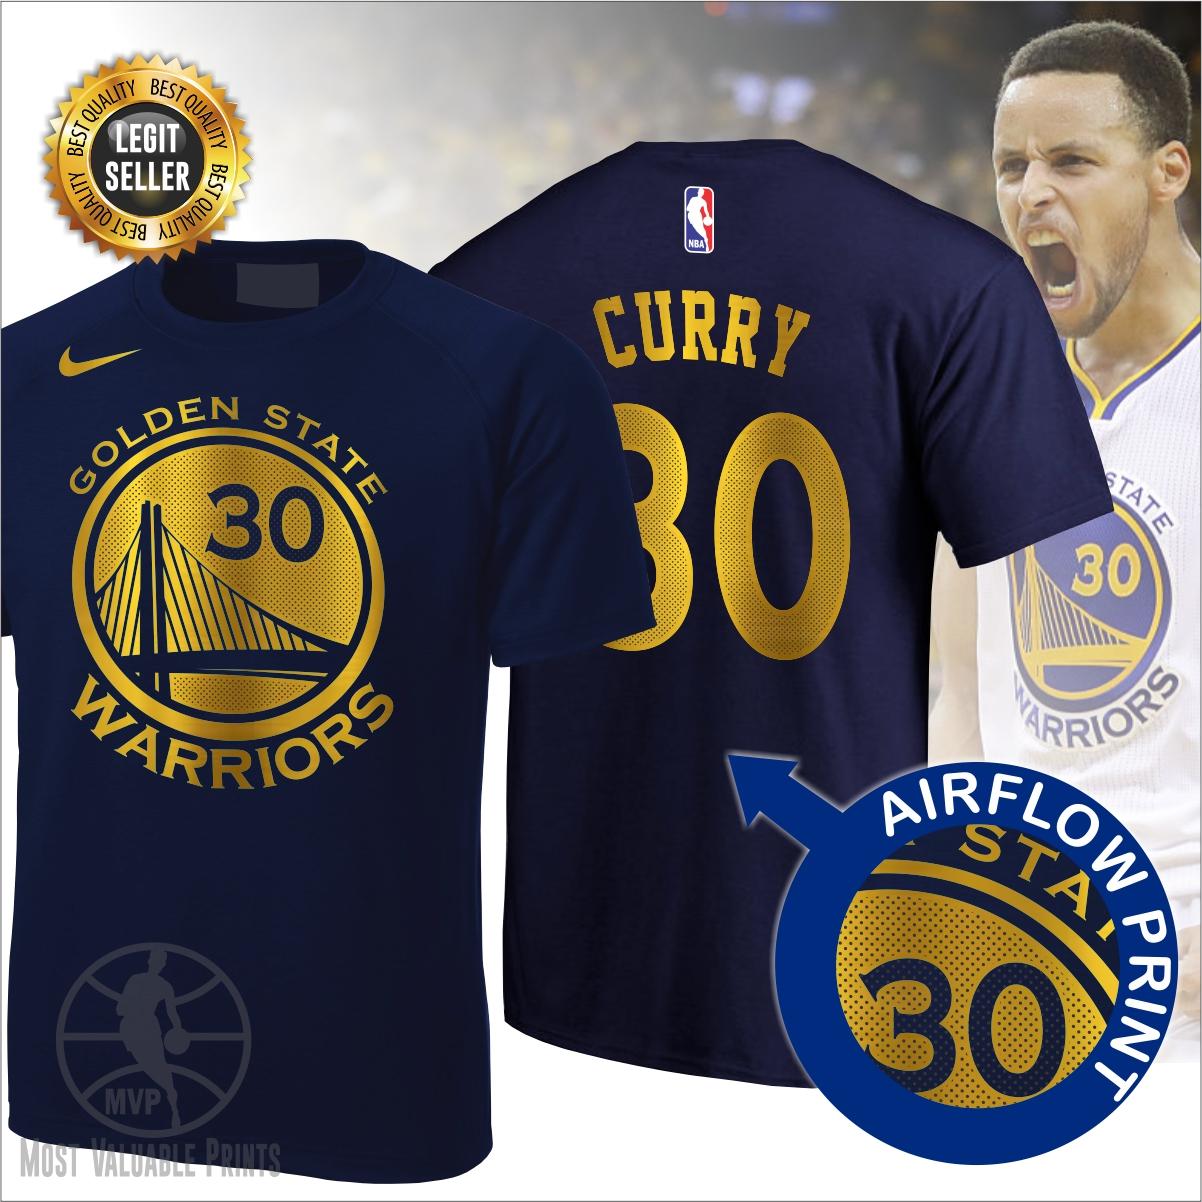 Pin by Golden State Warriors on Warriors Artwork